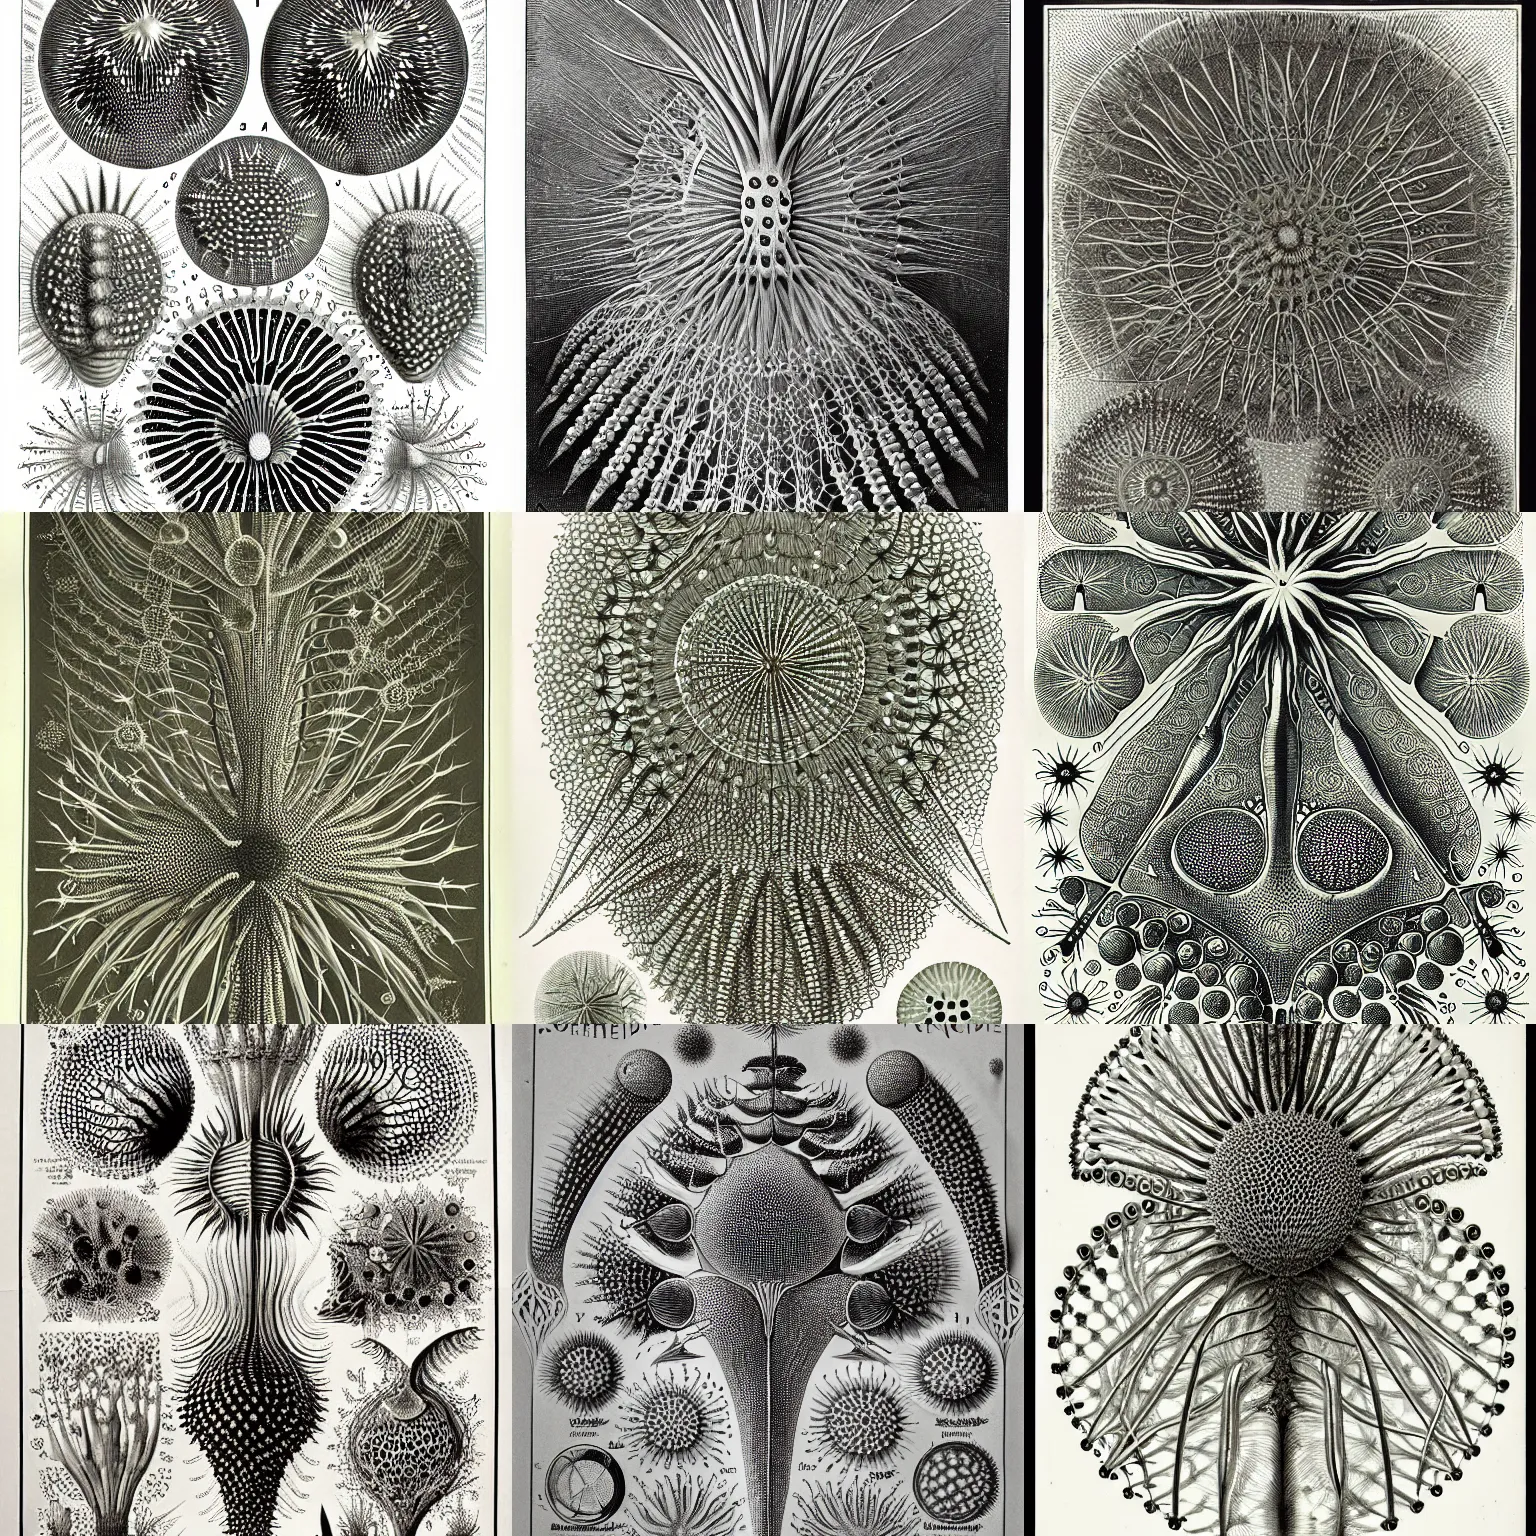 Prompt: Radiolaria scientific zoological illustration in vintage Victorian England style by Ernst Haeckel